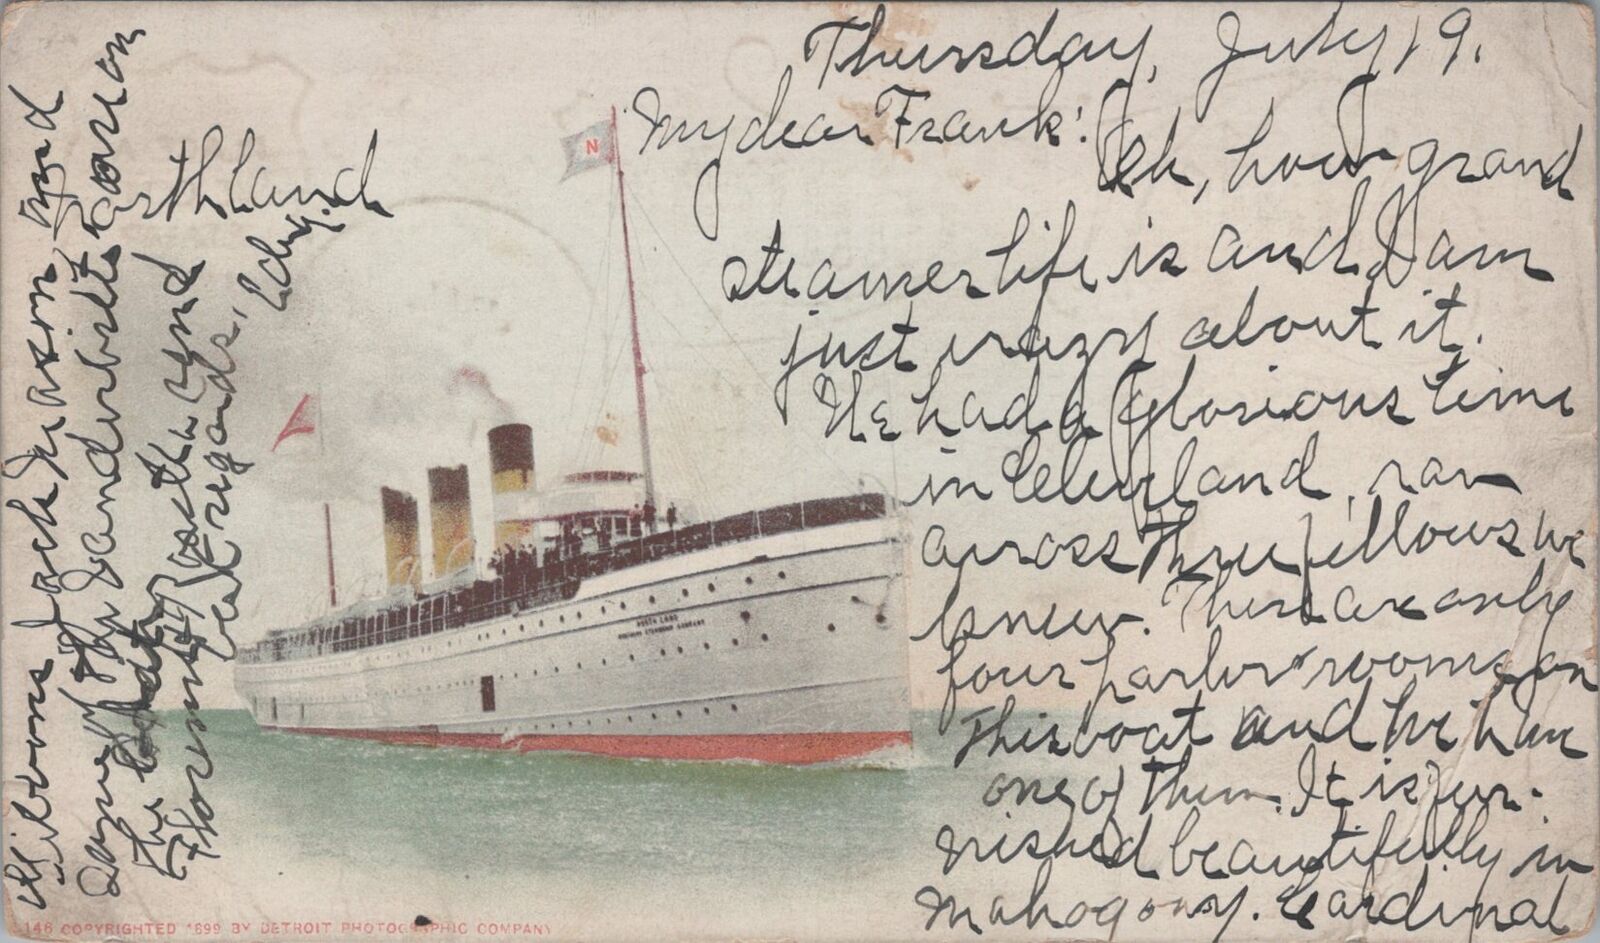 Luxury Liner, North Land Passenger Ship,1900 Private Mailing Card to Heidelberg